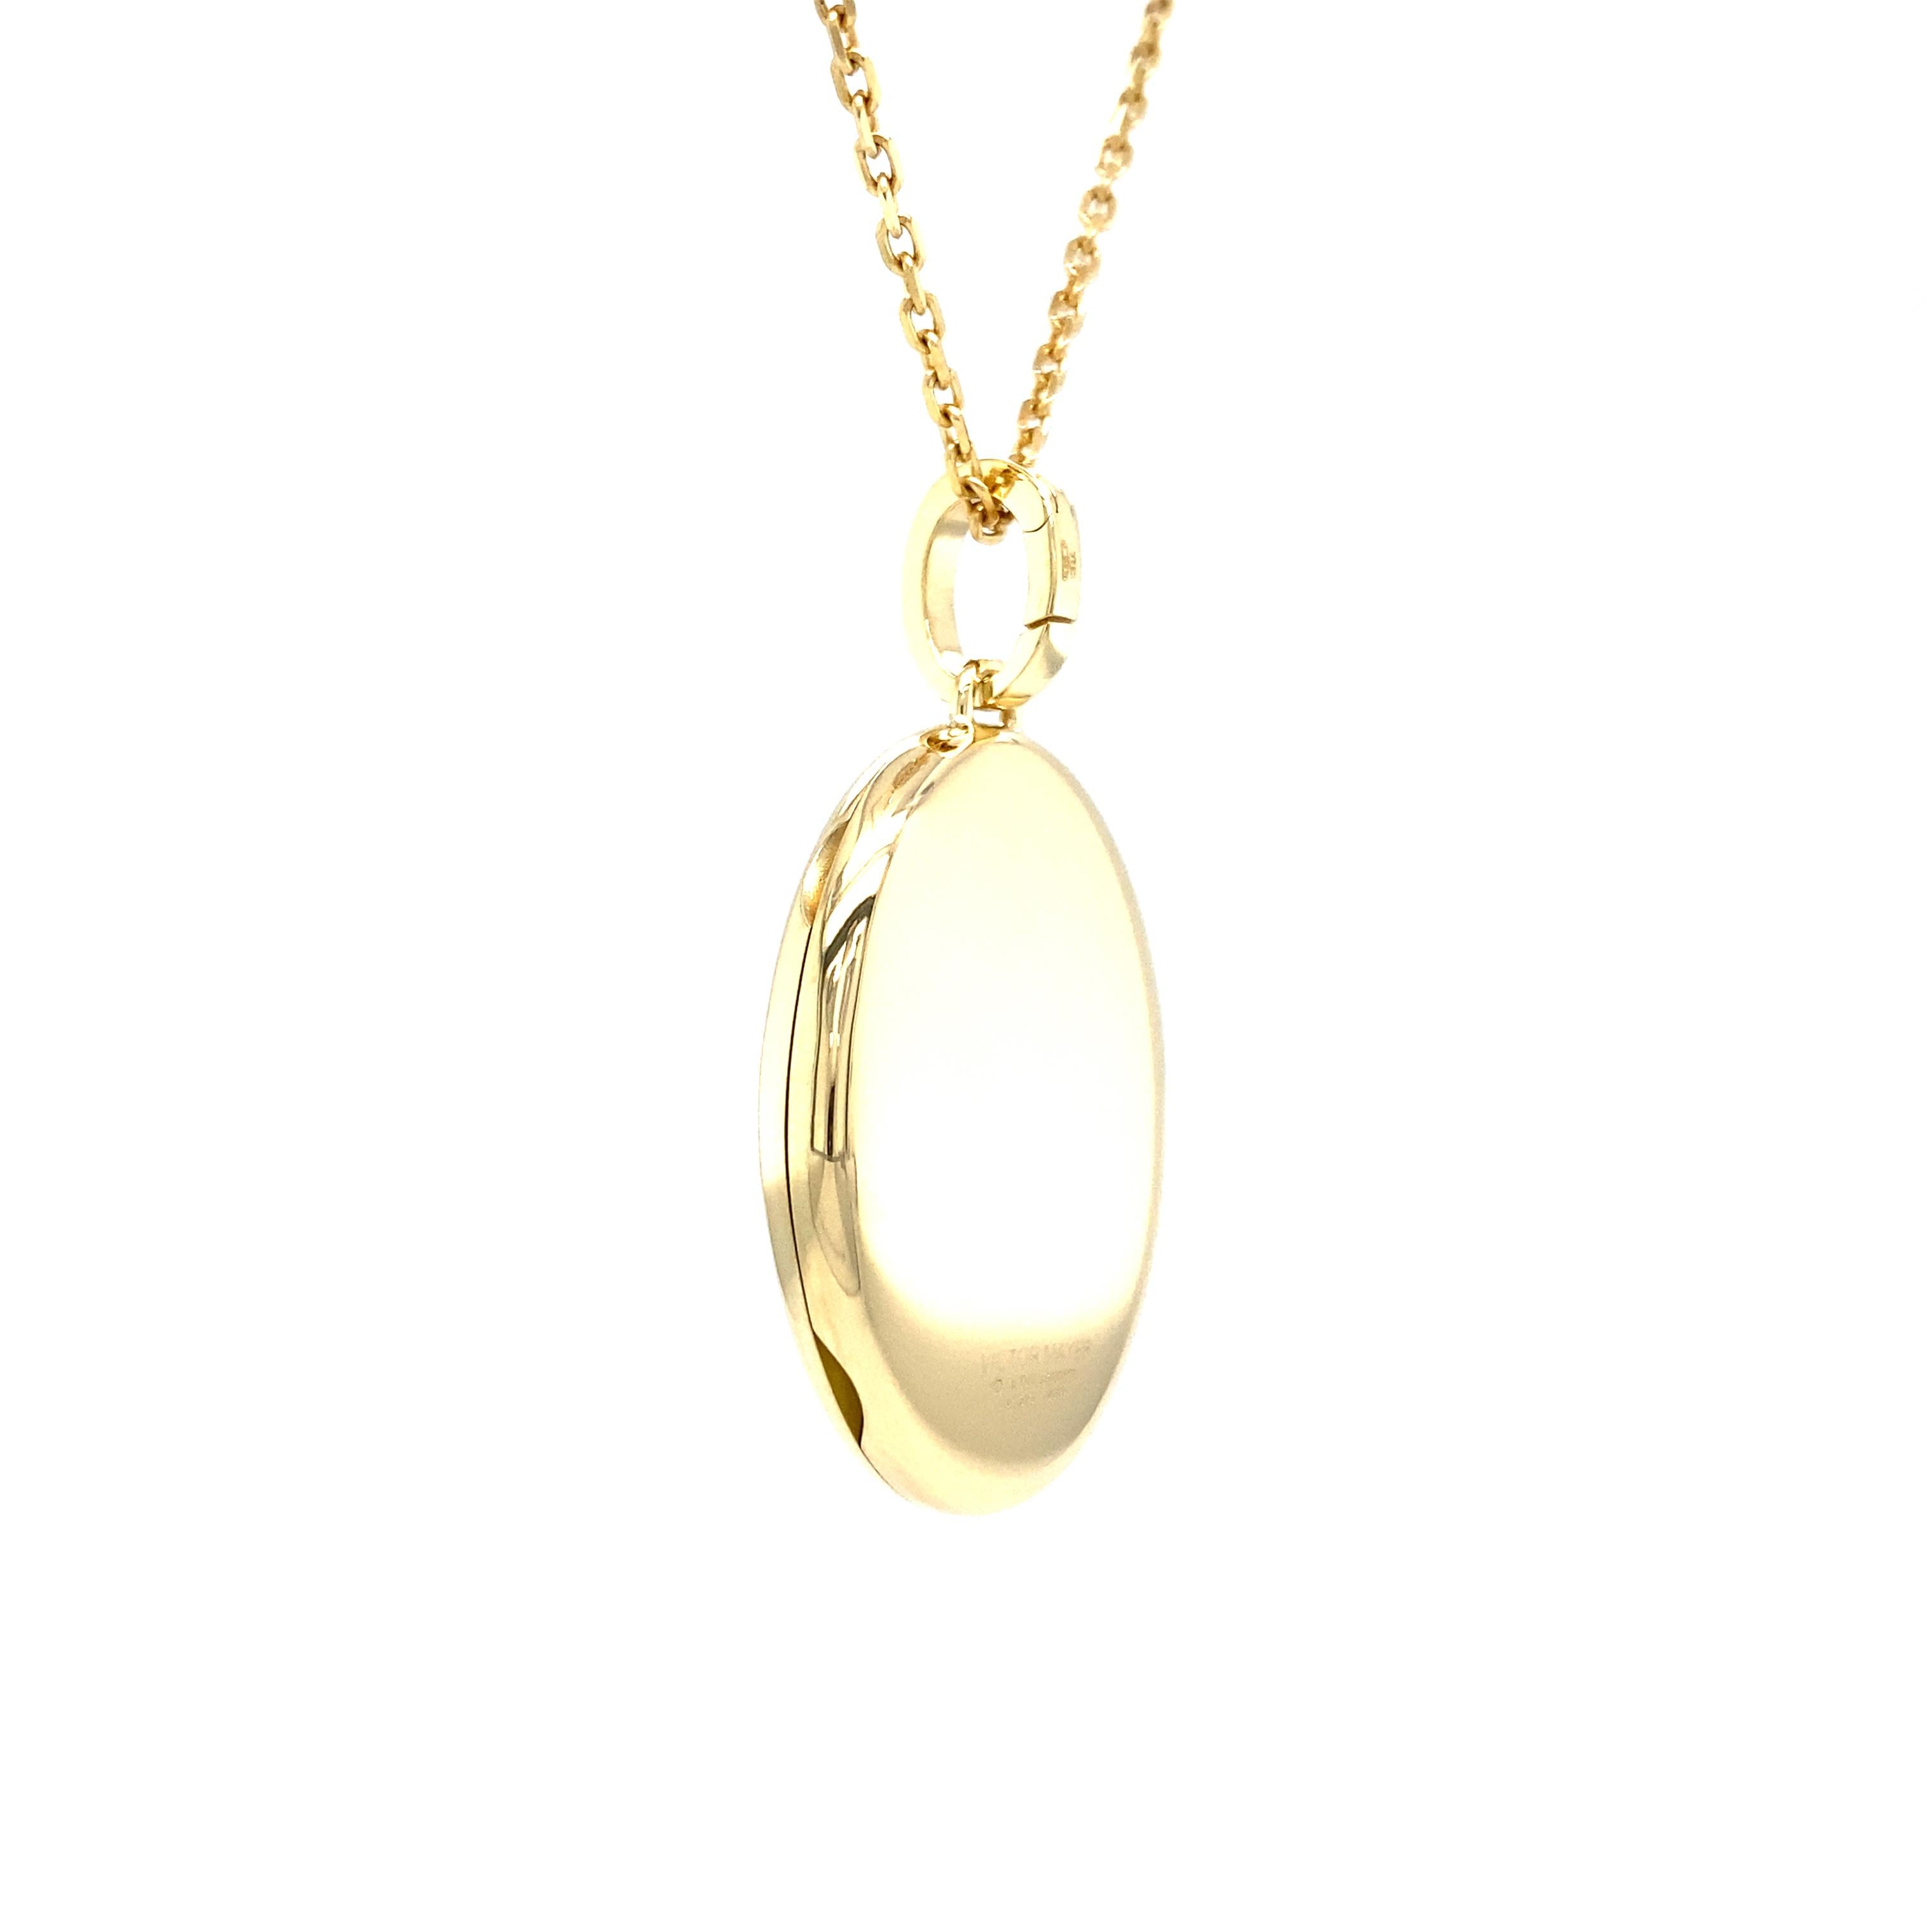 Women's Oval Polished Locket Pendant Necklace - 18k Yellow Gold - 9 Diamonds 0.14ct G VS For Sale